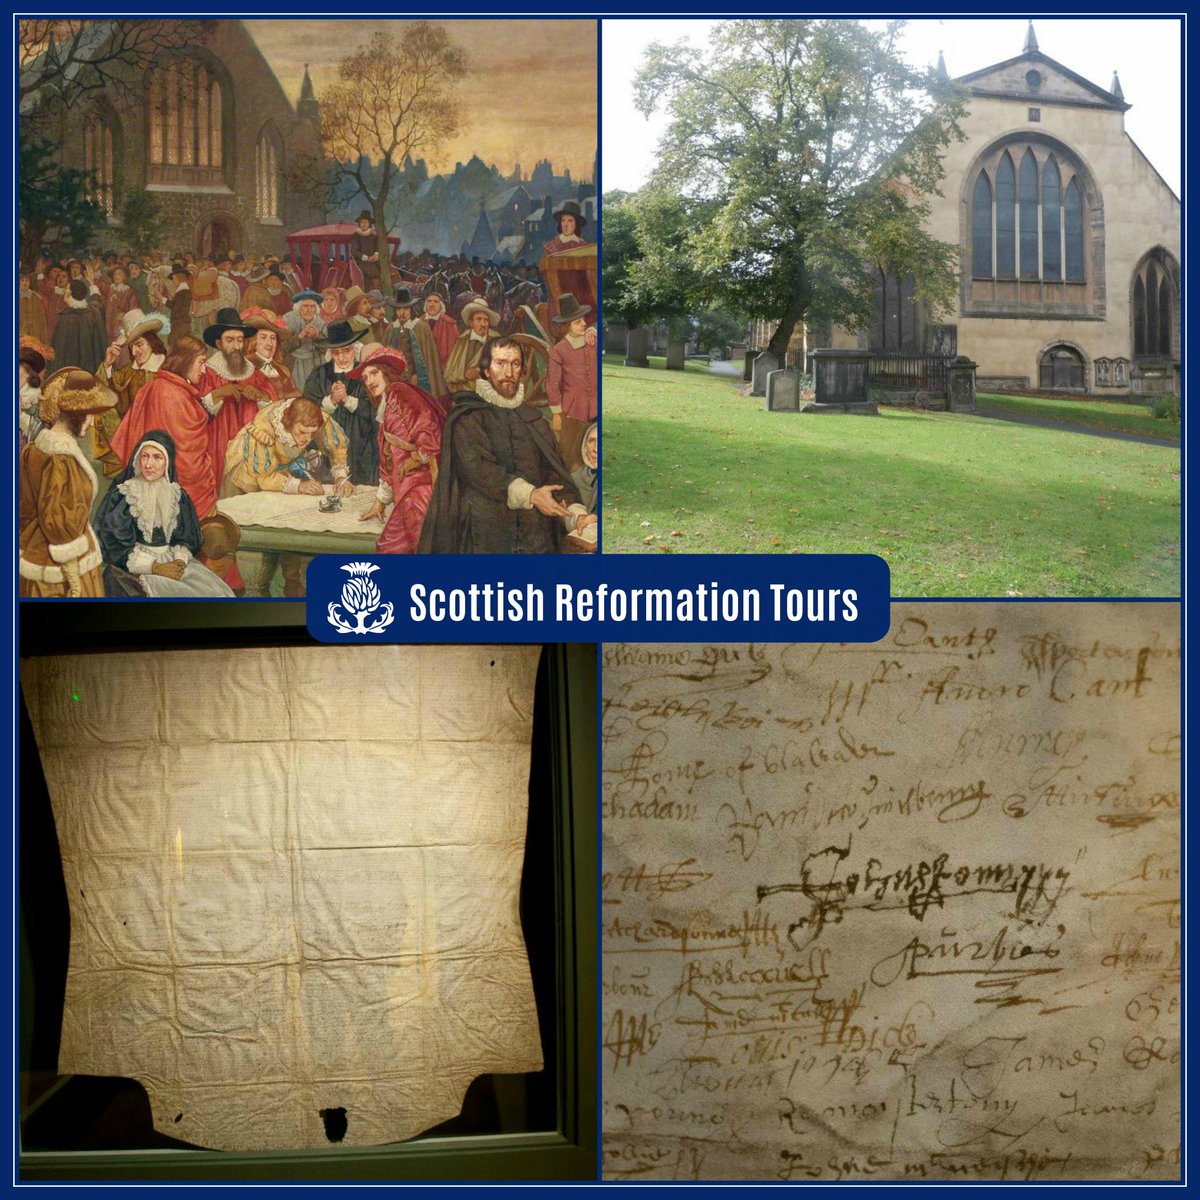 Today is the 382nd anniversary of the signing of Scotland's National Covenant, 28th February 1638. Between 1660-1688 approximately 18,000 people in Scotland would be persecuted for their adherence to it. #Presbyterianism #Covenanters #Scotland #NationalCovenant #ChurchHistory